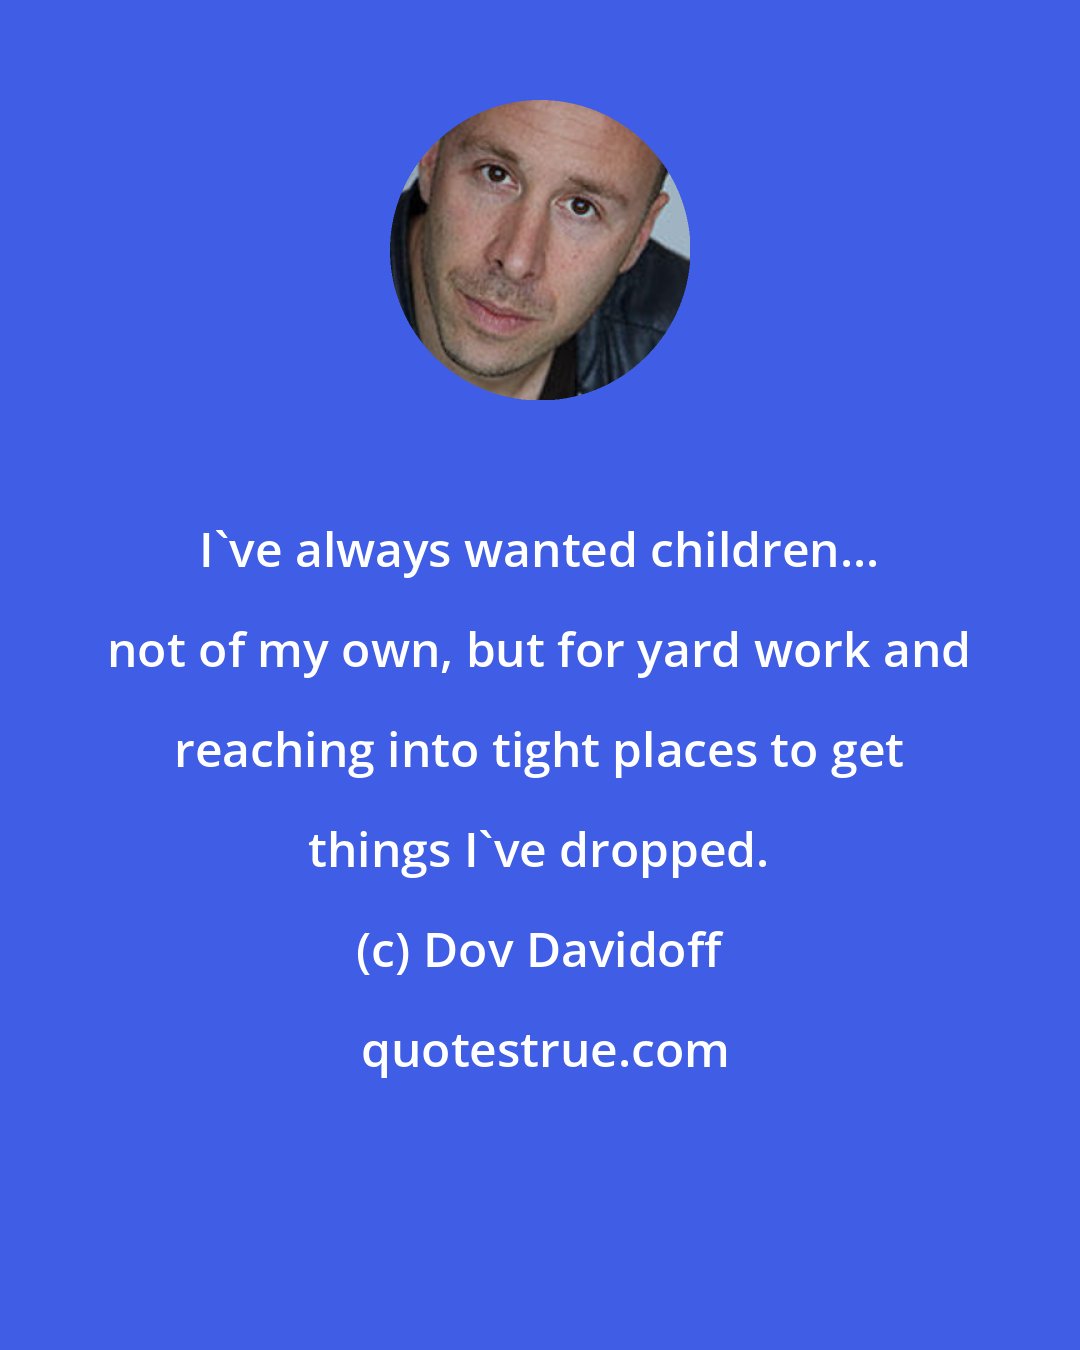 Dov Davidoff: I've always wanted children... not of my own, but for yard work and reaching into tight places to get things I've dropped.